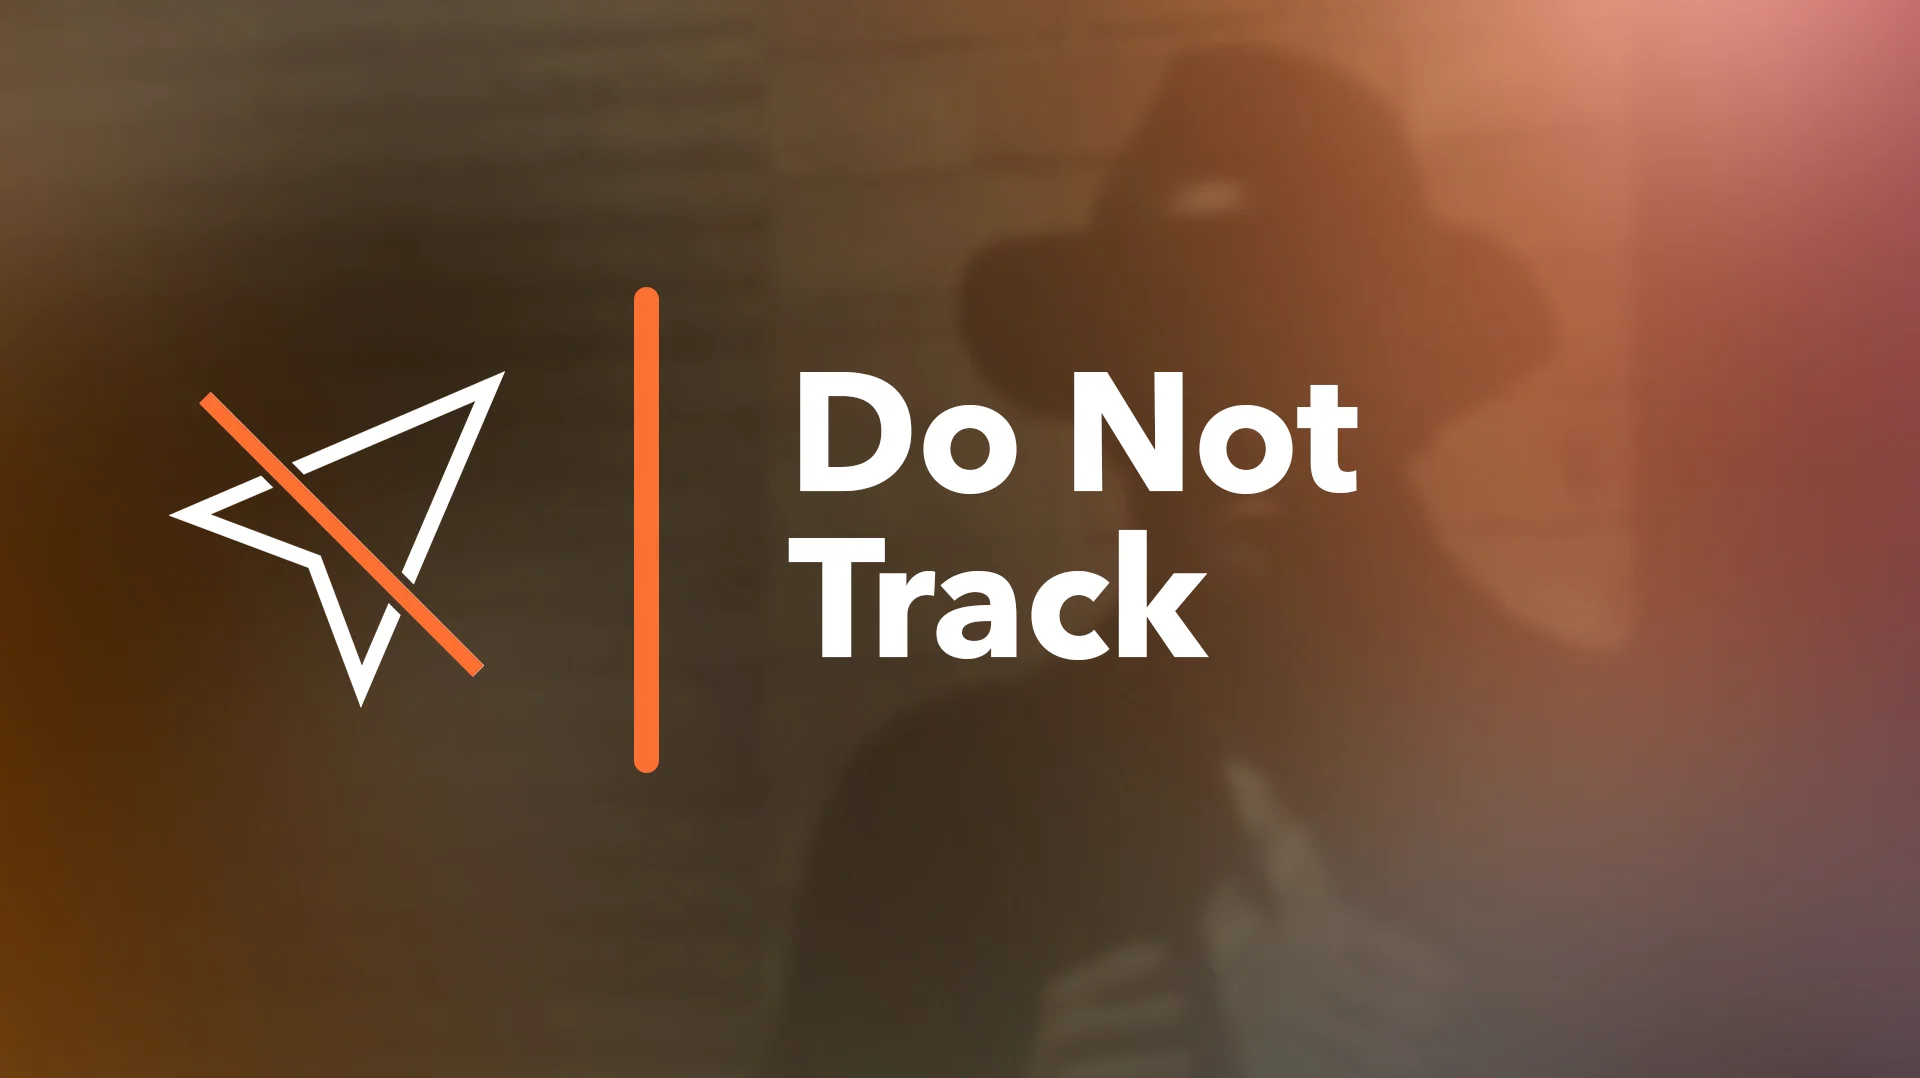 Do Not Track (DNT) history